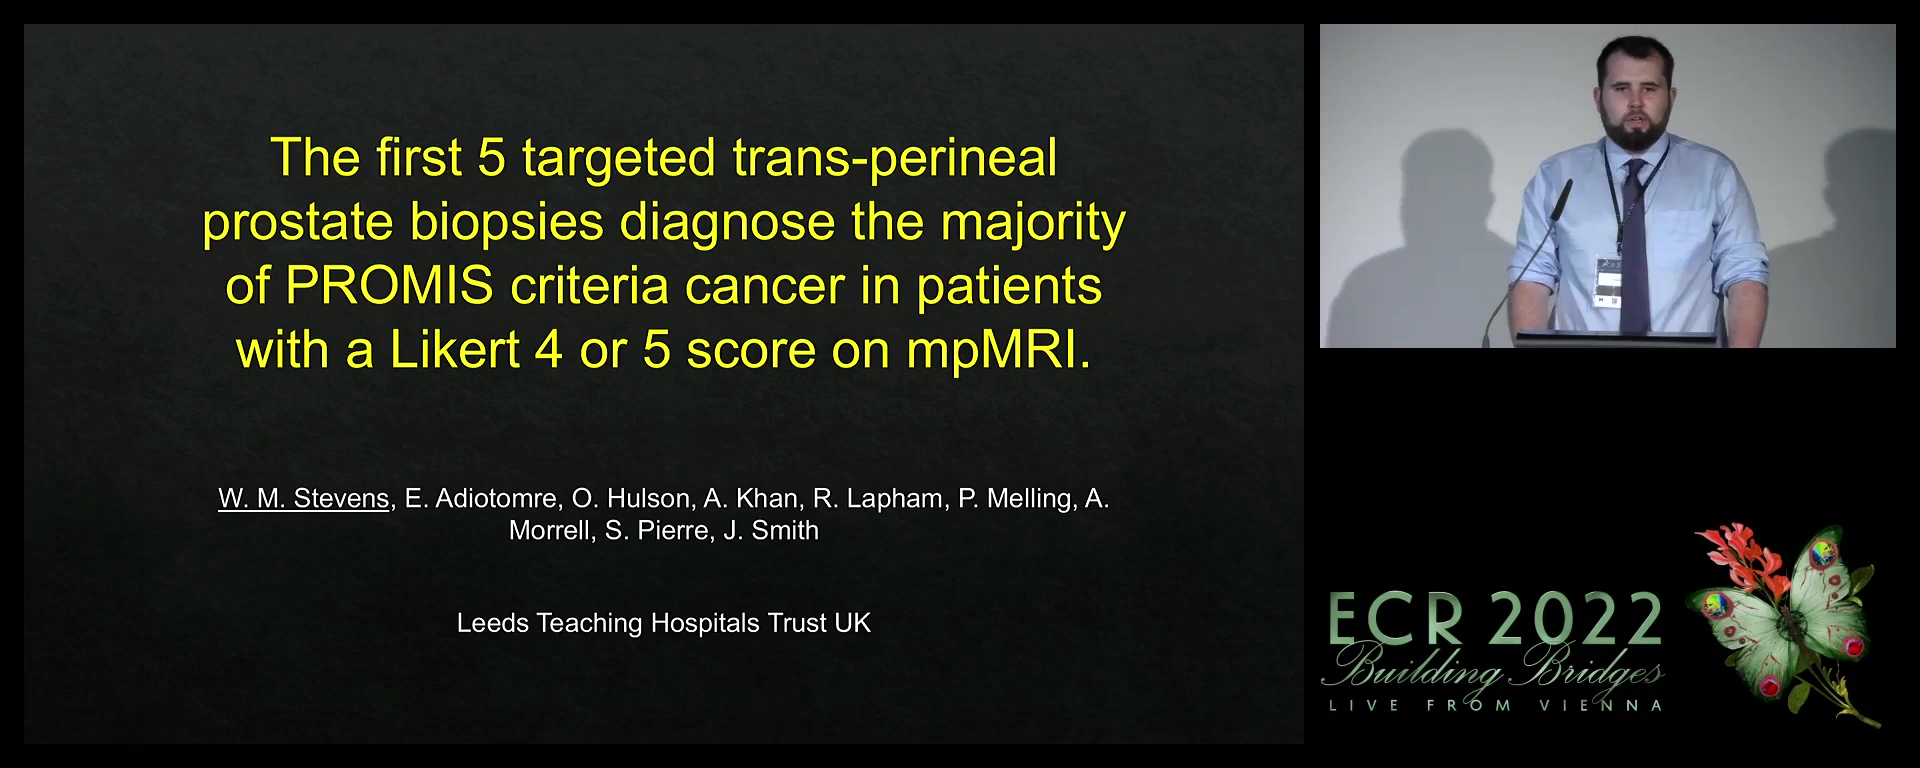 The first 5 targeted trans-perineal prostate biopsies diagnose the majority of PROMIS criteria cancer in patients with a Likert 4 or 5 score on mpMRI - William Stevens, Bradford / UK